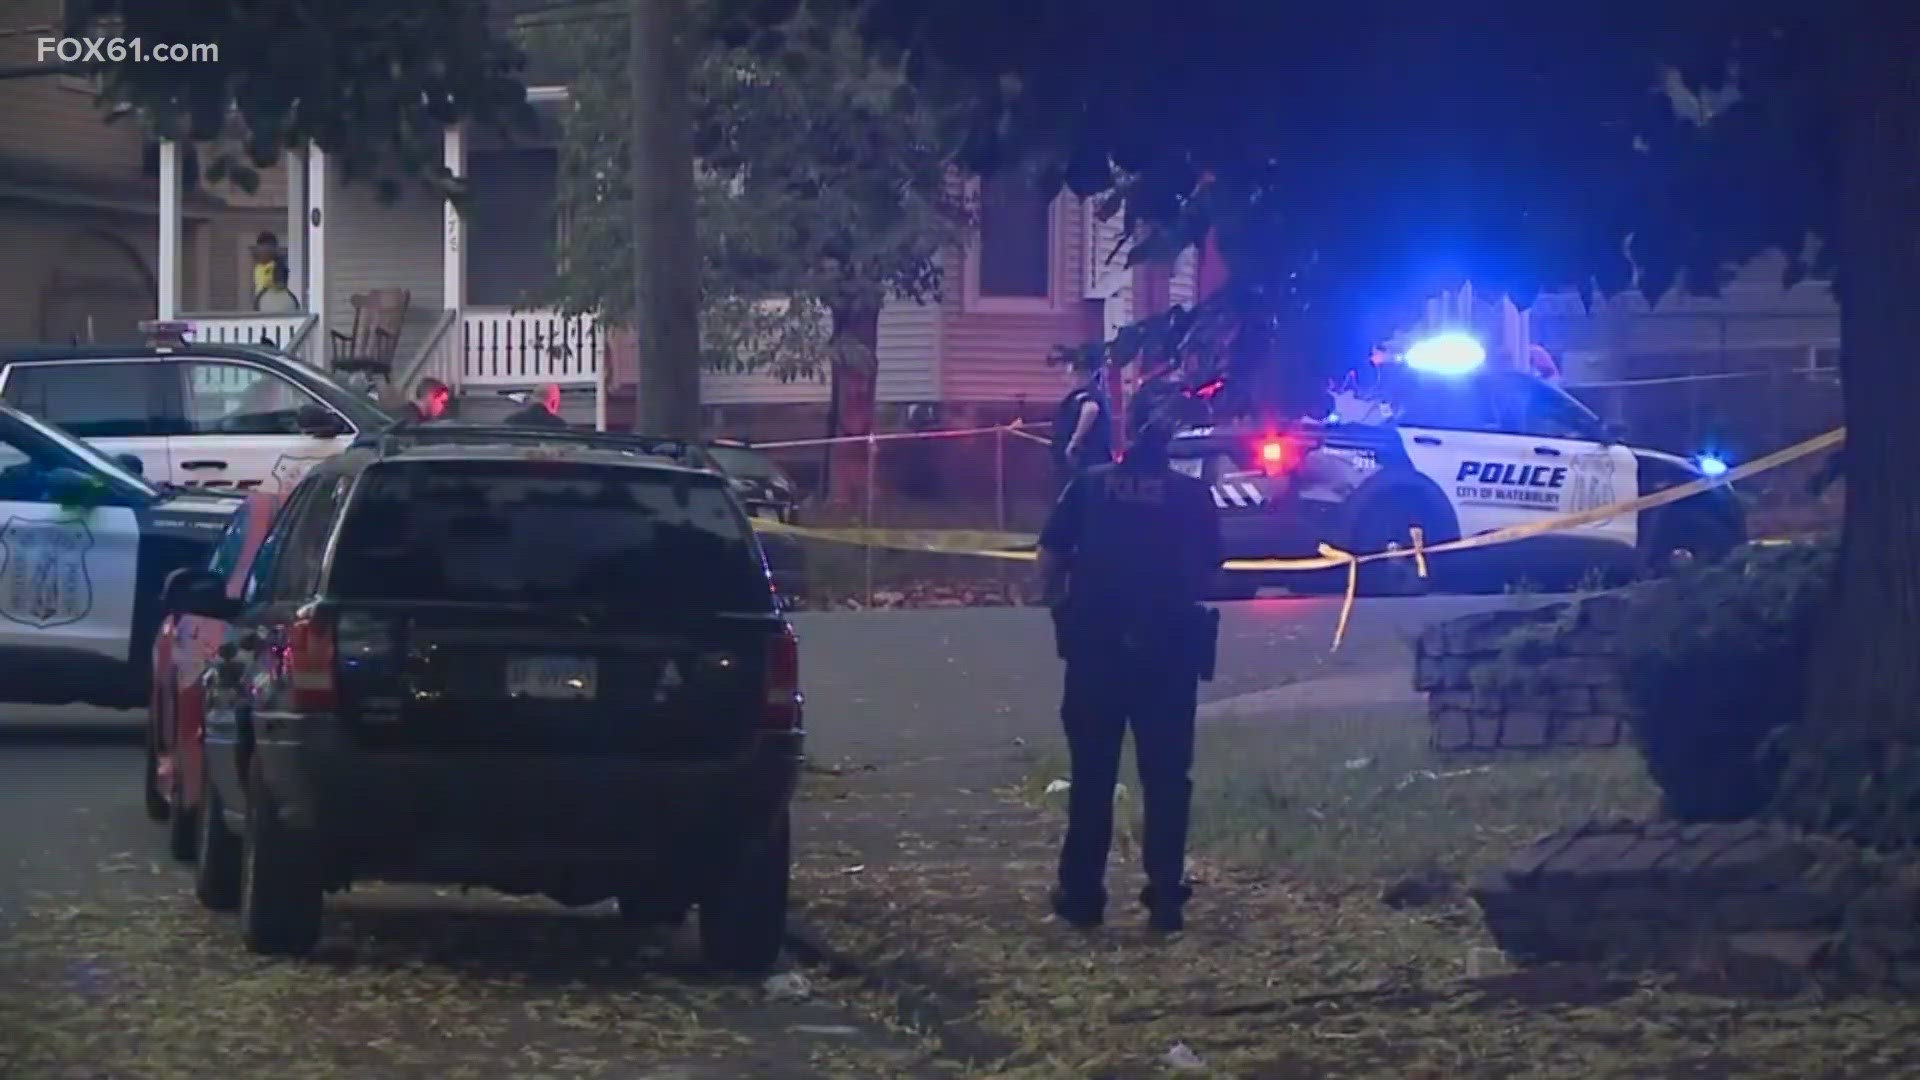 Police determined that a female victim had been shot and she was pronounced dead at the scene.